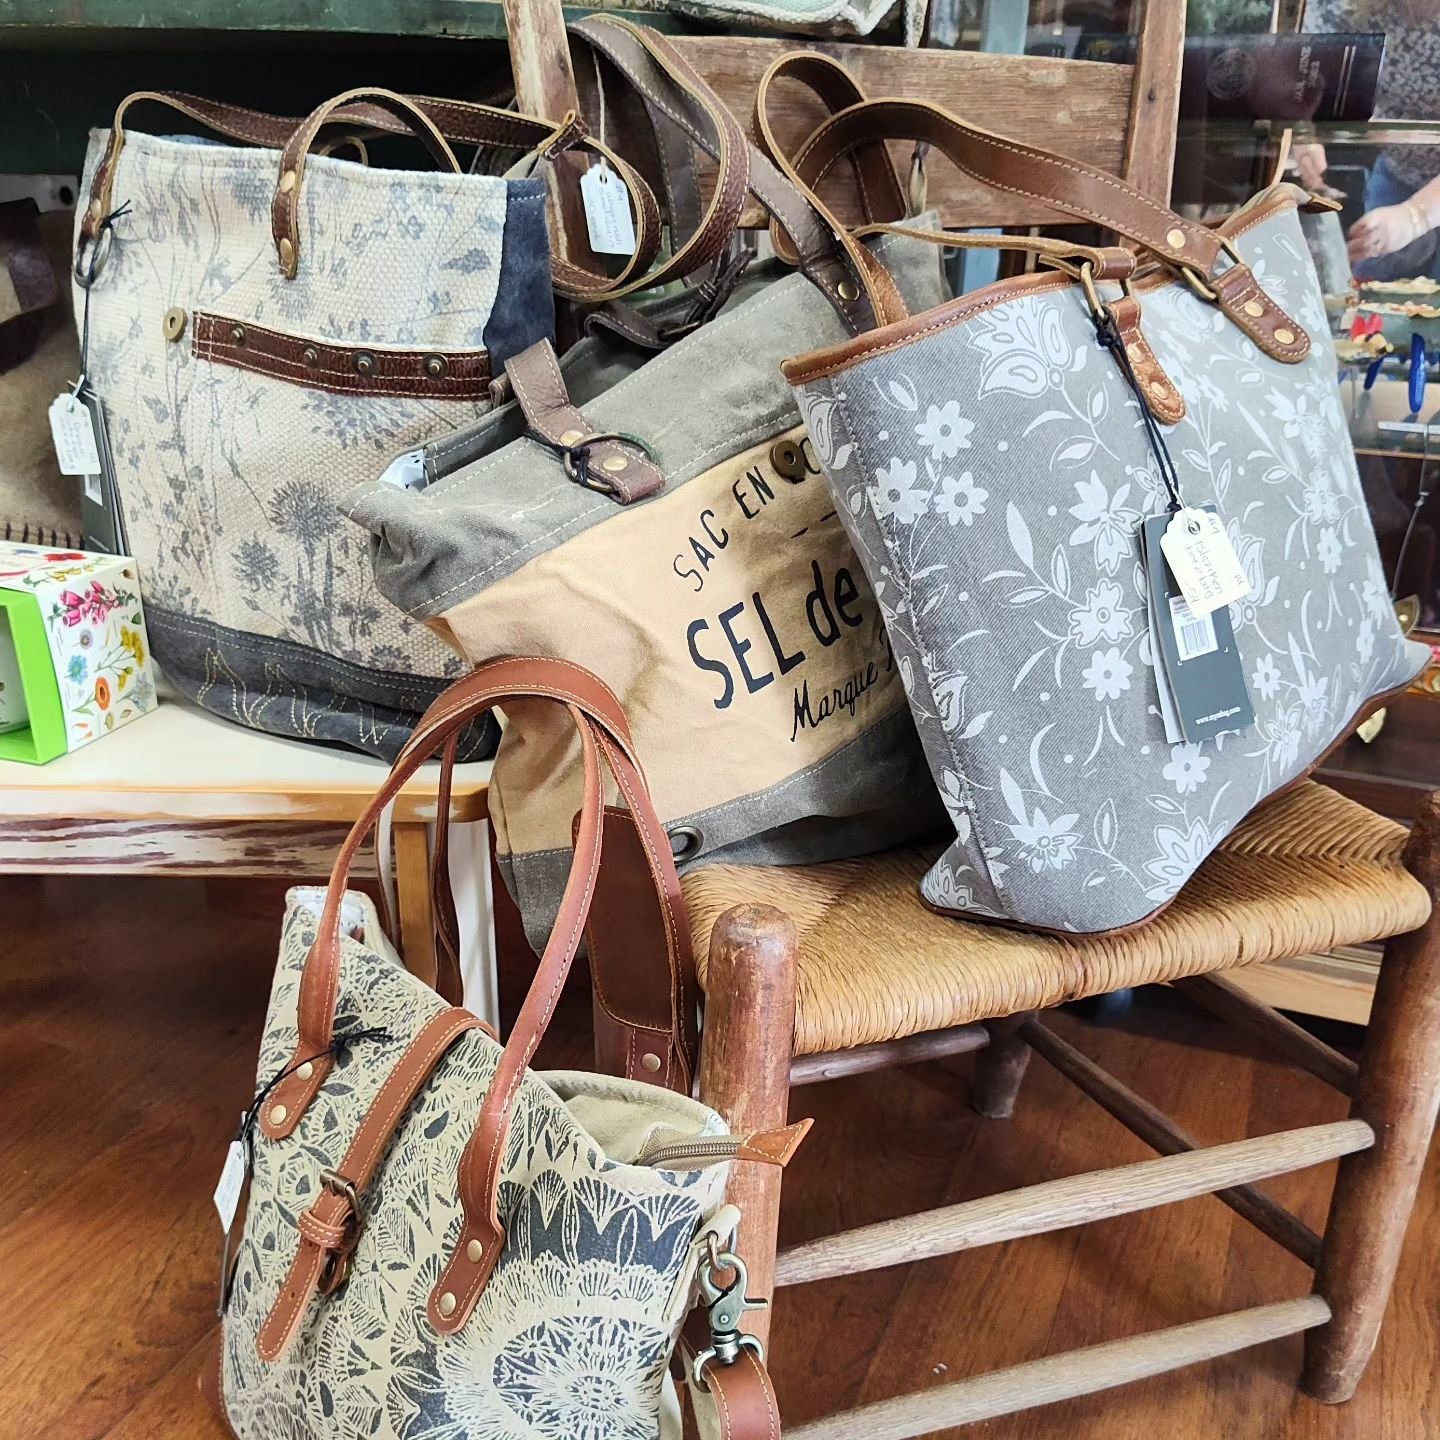 Myra bags are in! Just in time for Mother's Day! A great selection of bags to choose from. Don't forget teacher appreciation is coming up too. The Garage on 25 has lots of great gift ideas for mom , teachers and anyone on your gift list. Can't decide